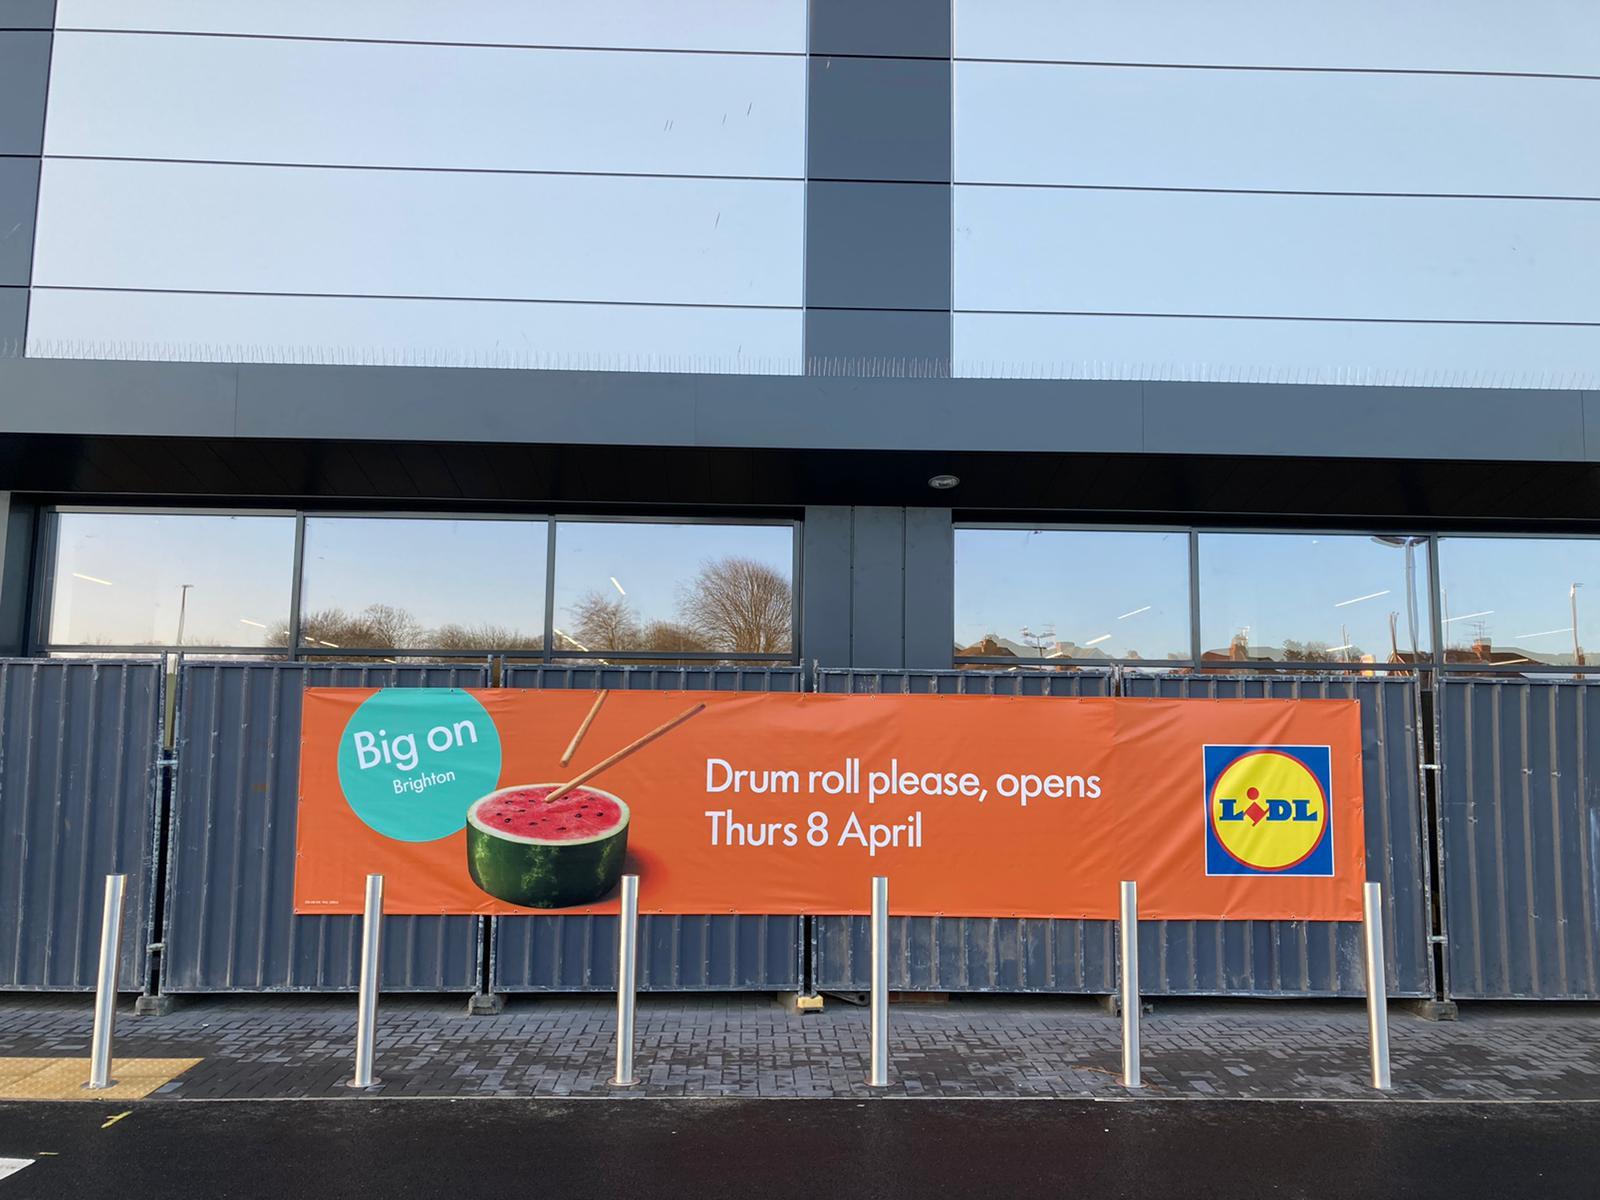 A new Lidl store will open in Hove tomorrow, April 8